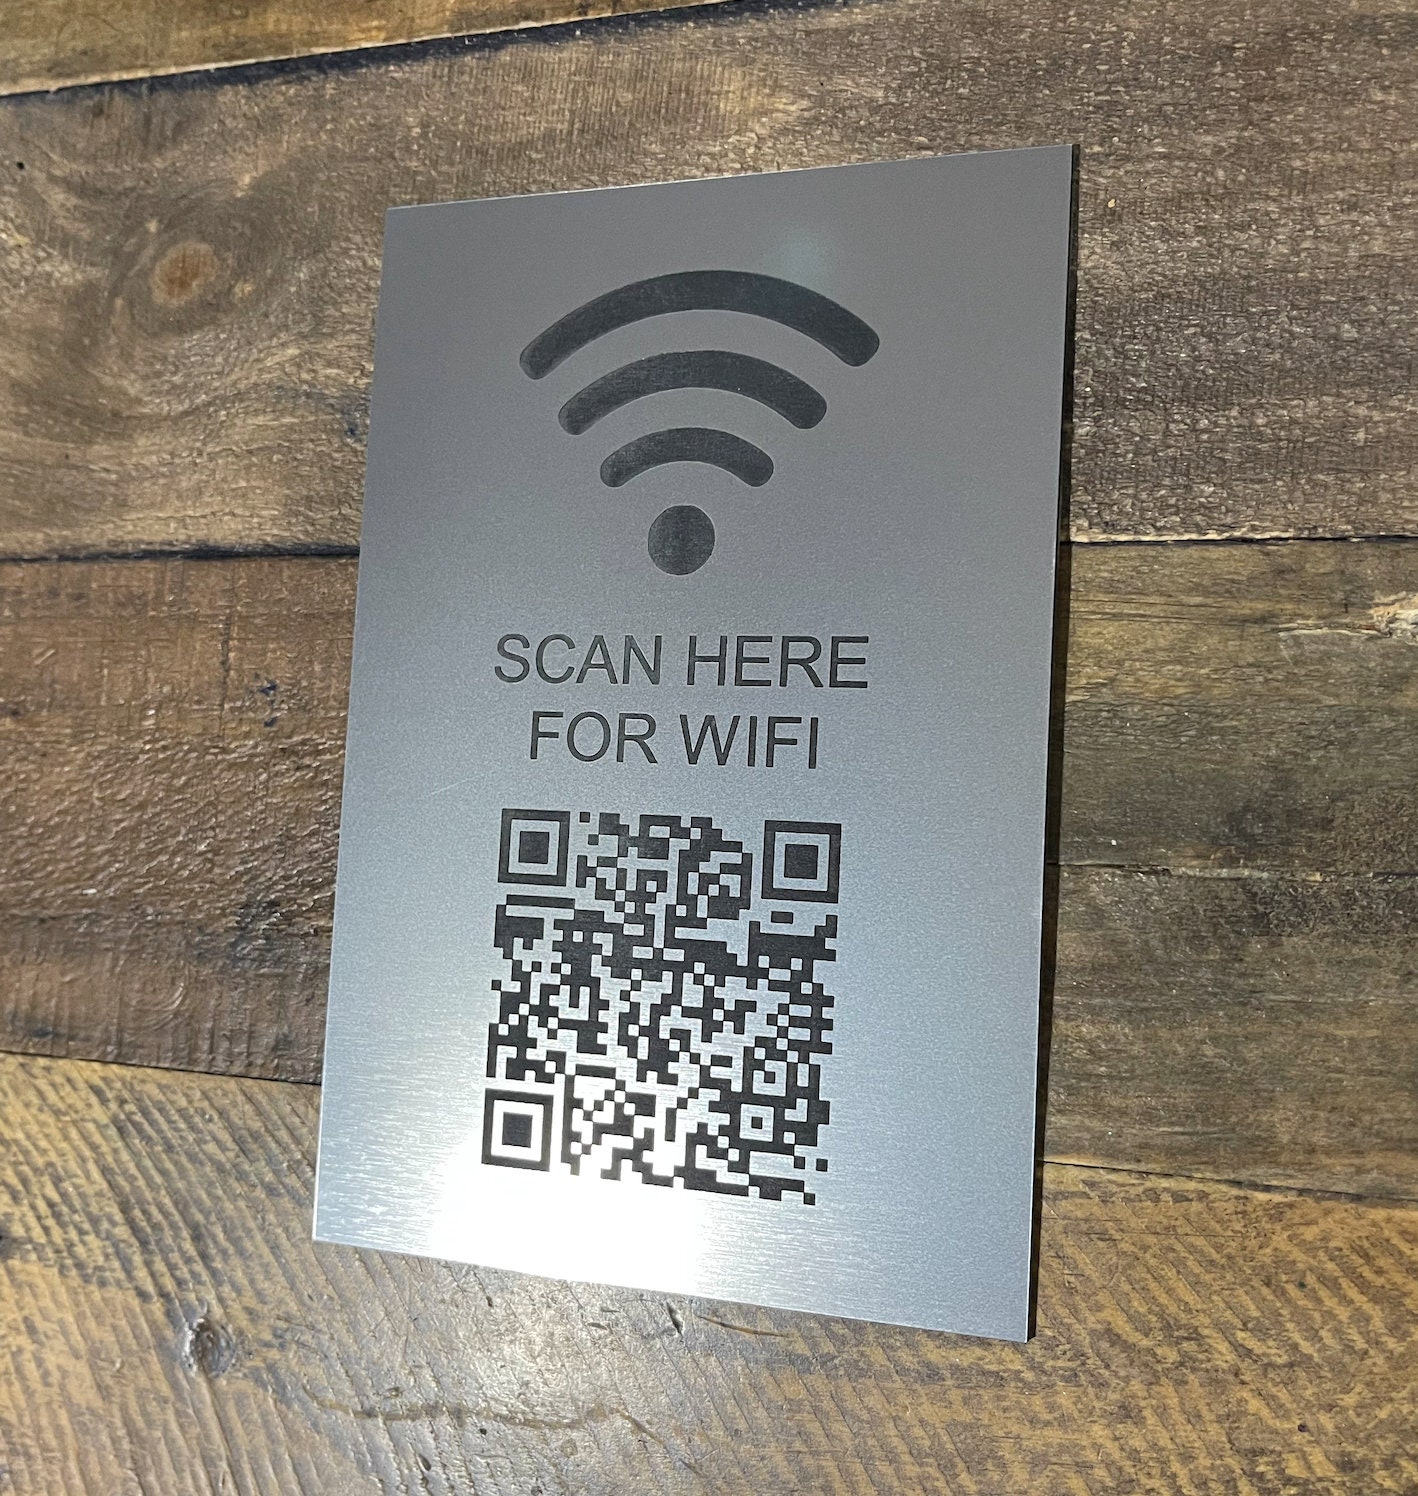 Connect To WiFi By Scanning QR Codes With Barcode Scanner [Android]